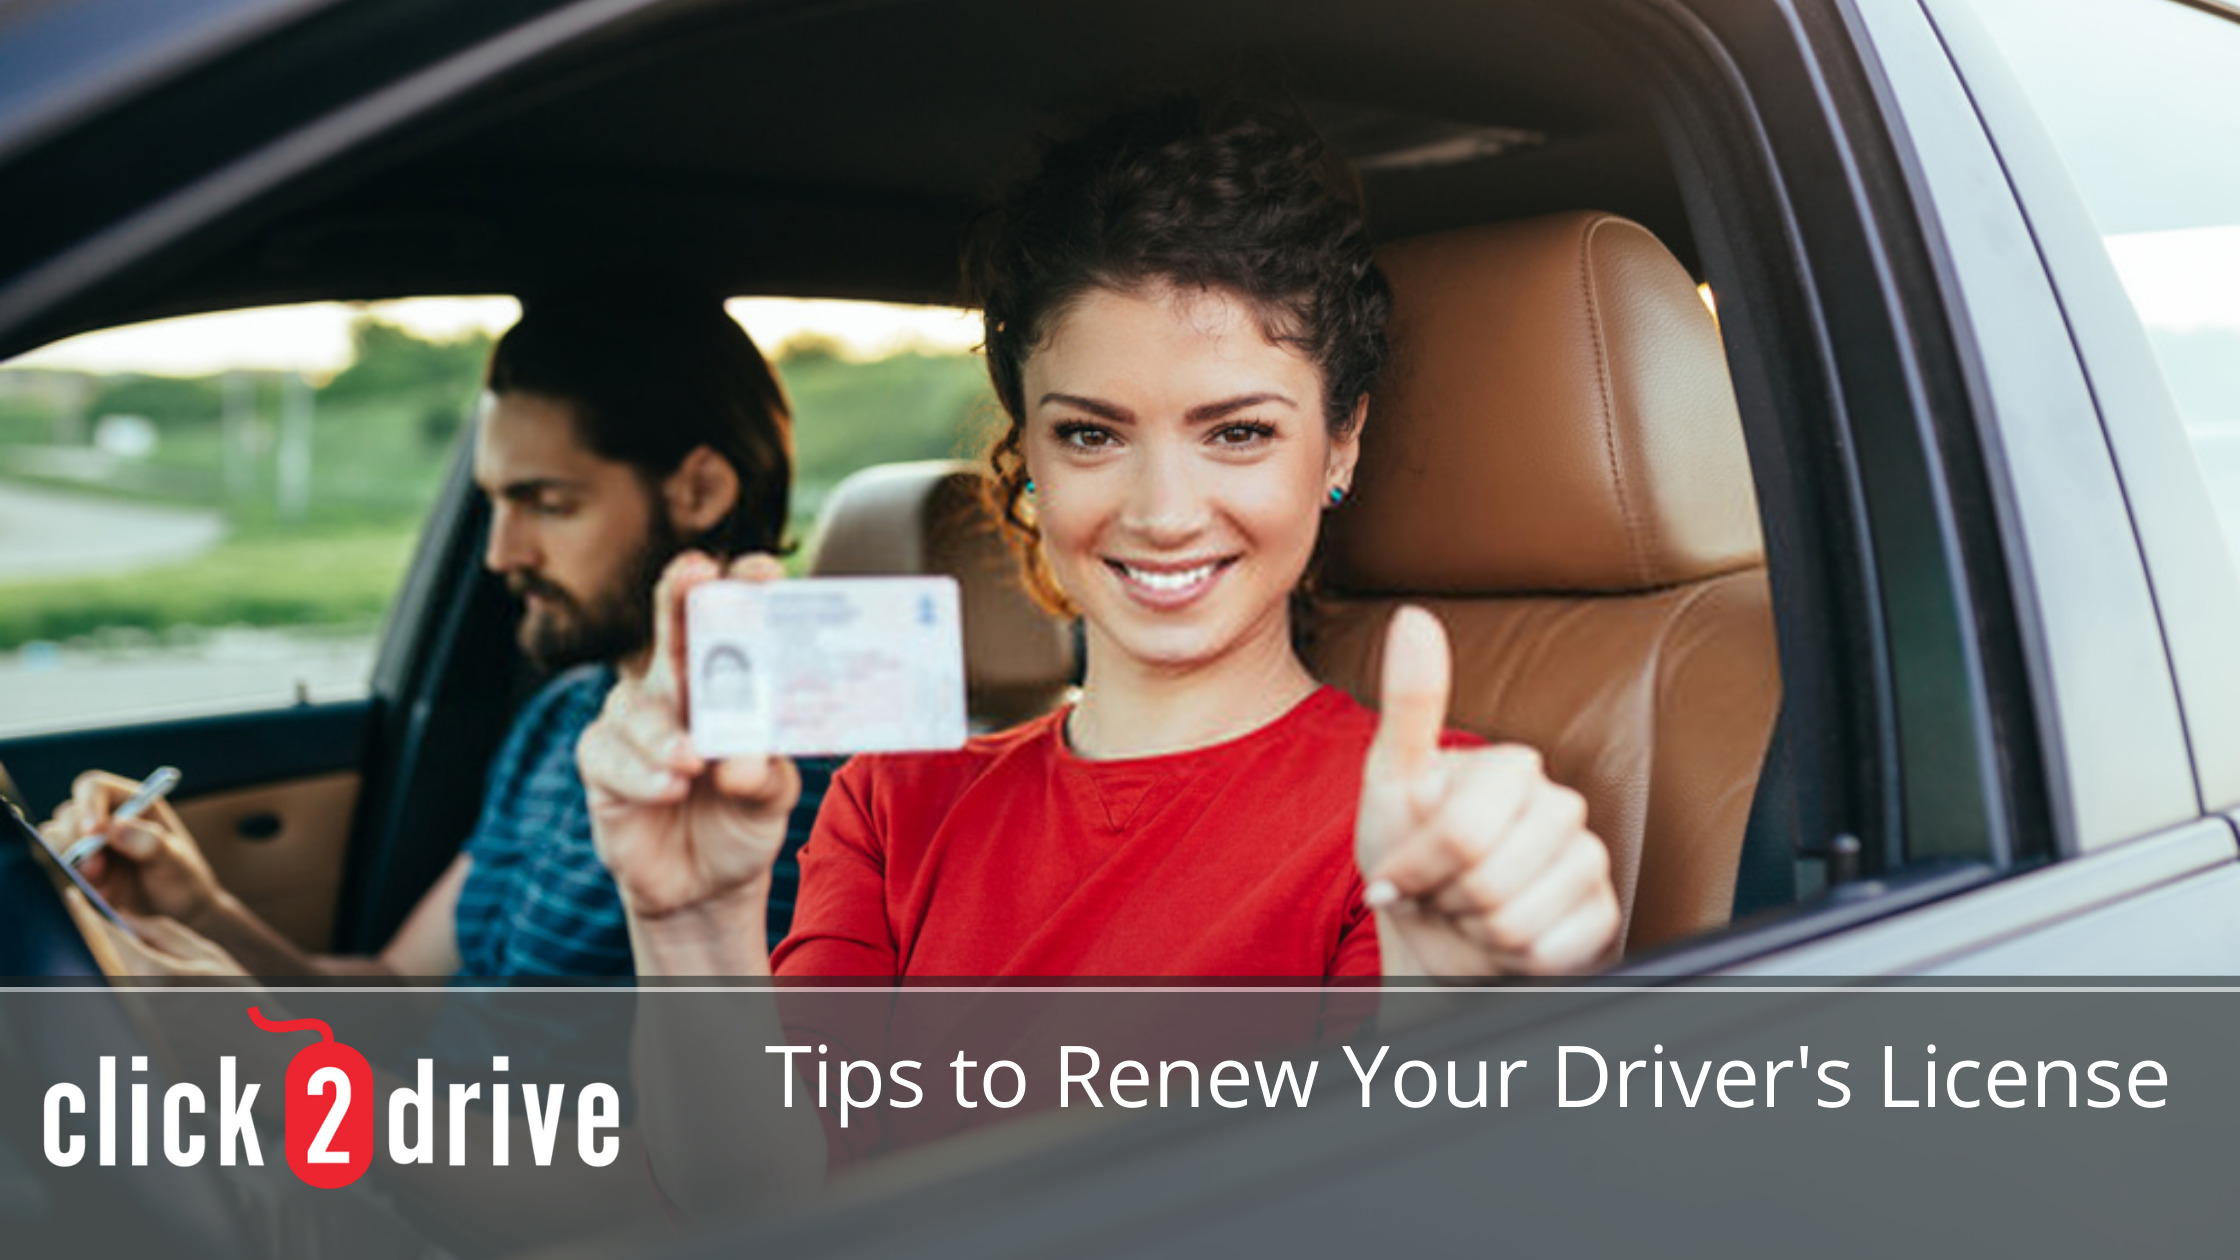 Tips to Renew Your Driver's License